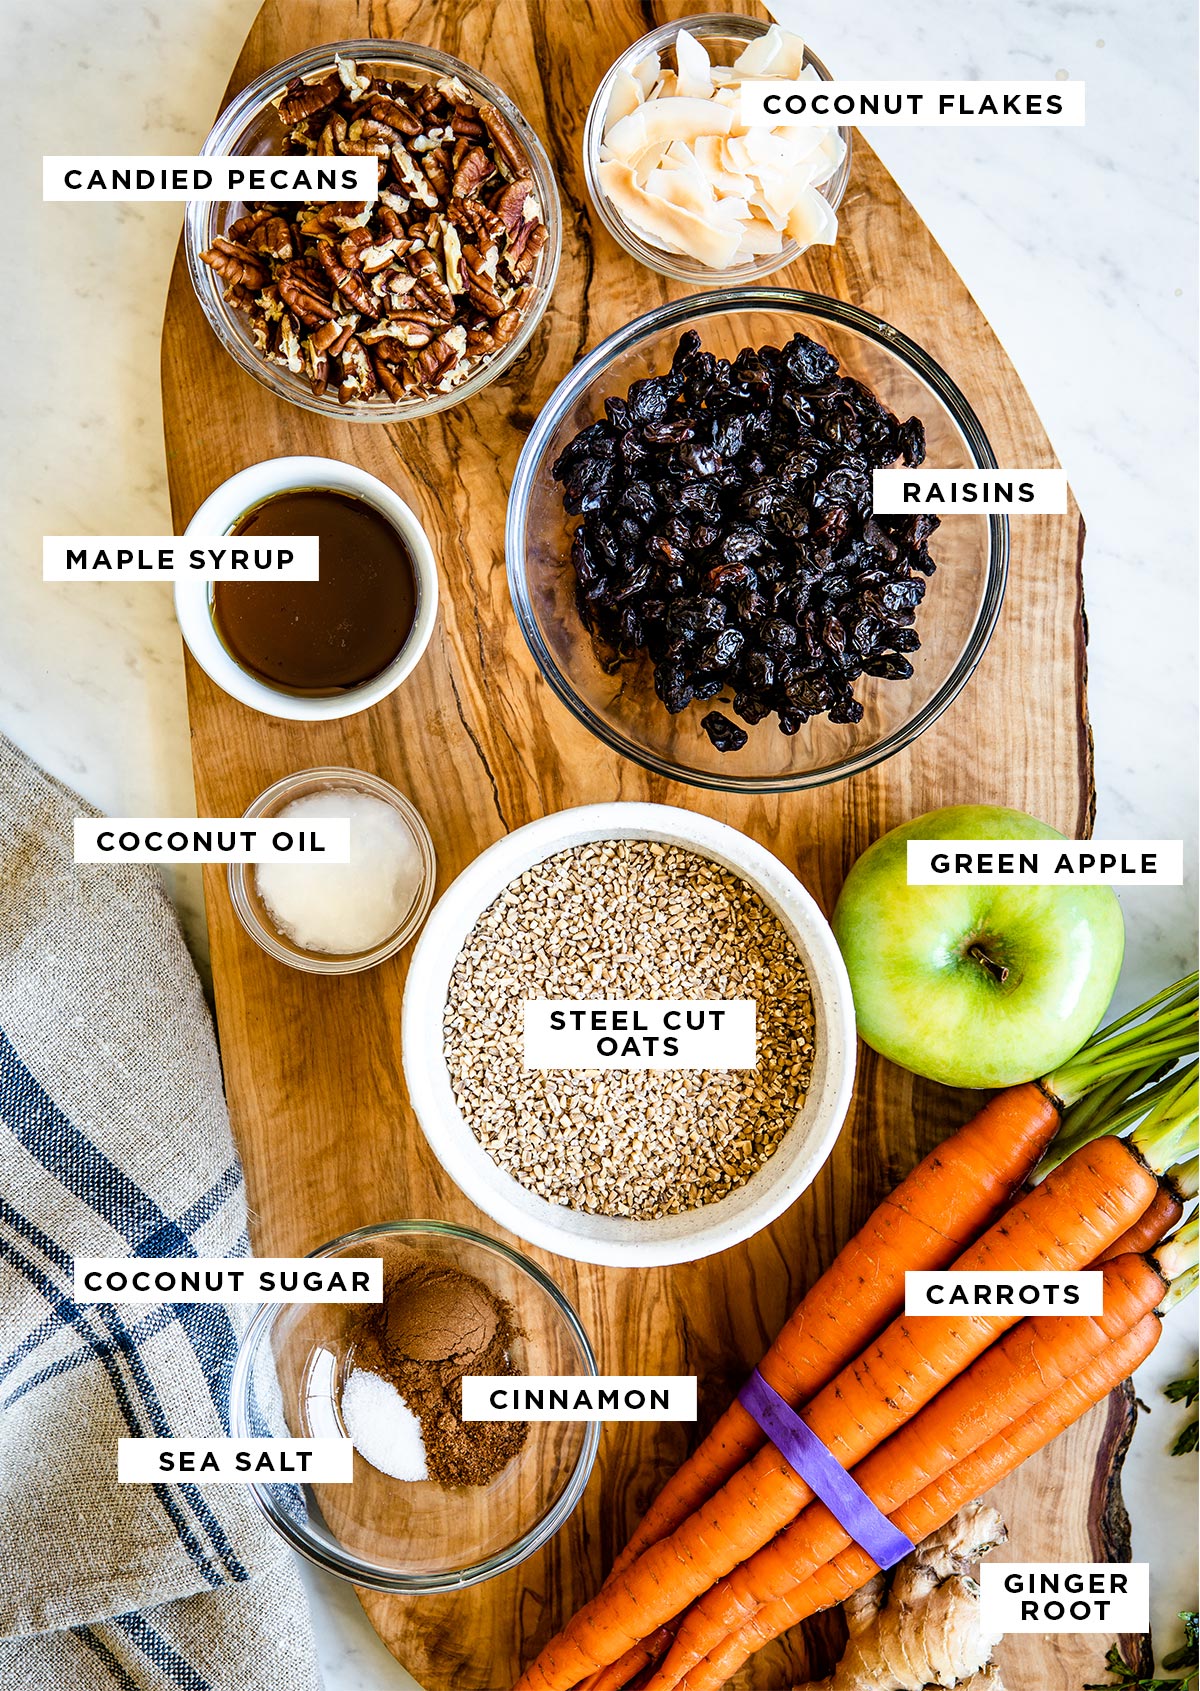 ingredients for stovetop oatmeal labeled: coconut flakes, candied pecans, maple syrup, raisins, coconut oil, steel cut oats, green apple, carrots, coconut sugar, sea salt, cinnamon and ginger root.